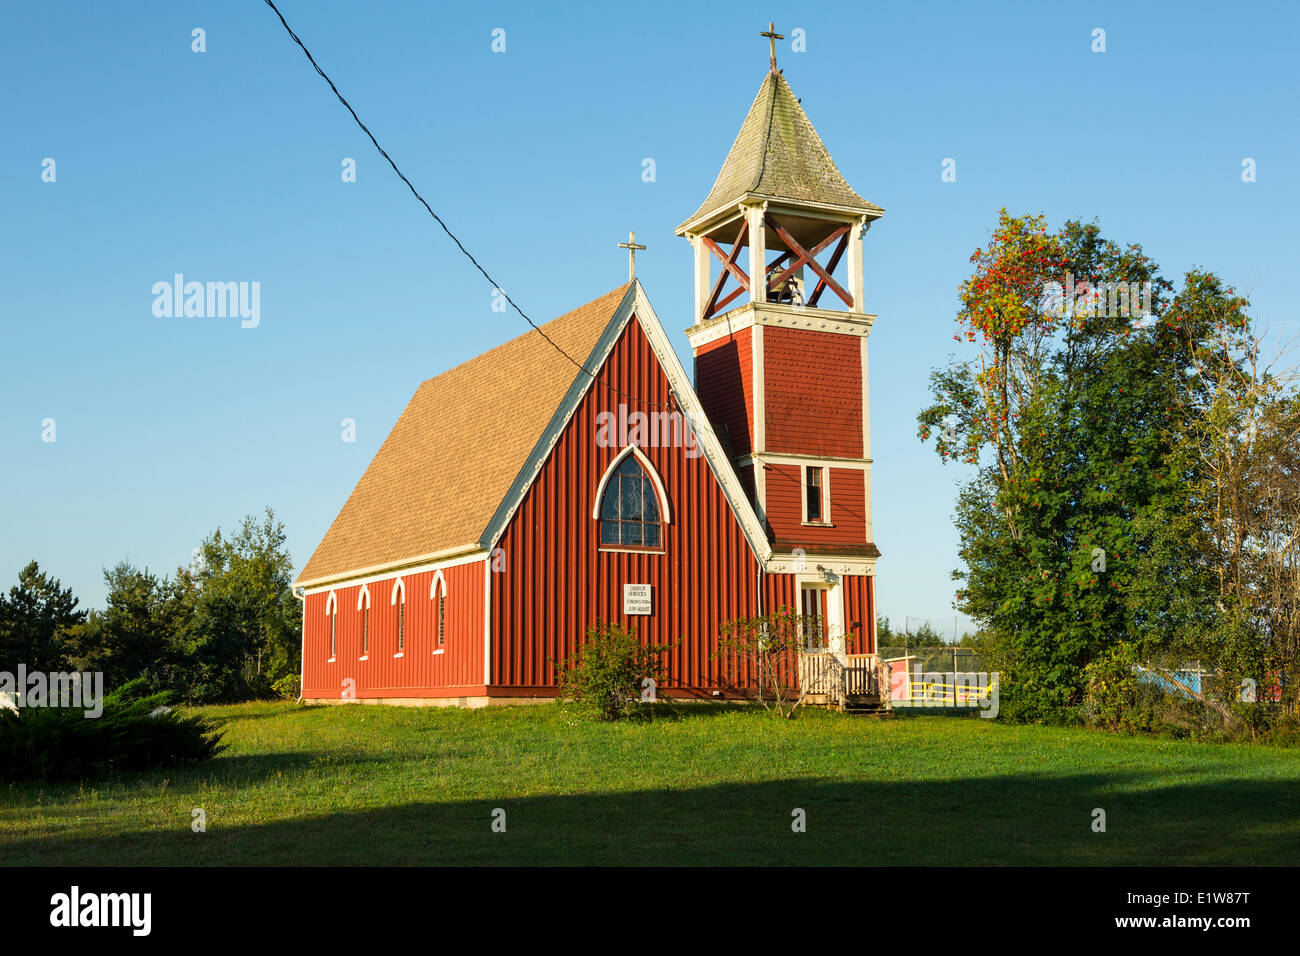 The Church of the Good Shepherd, built in 1892, is a modest, wooden, country Anglican church, Tidnish, Nova Scotia, Canada Stock Photo